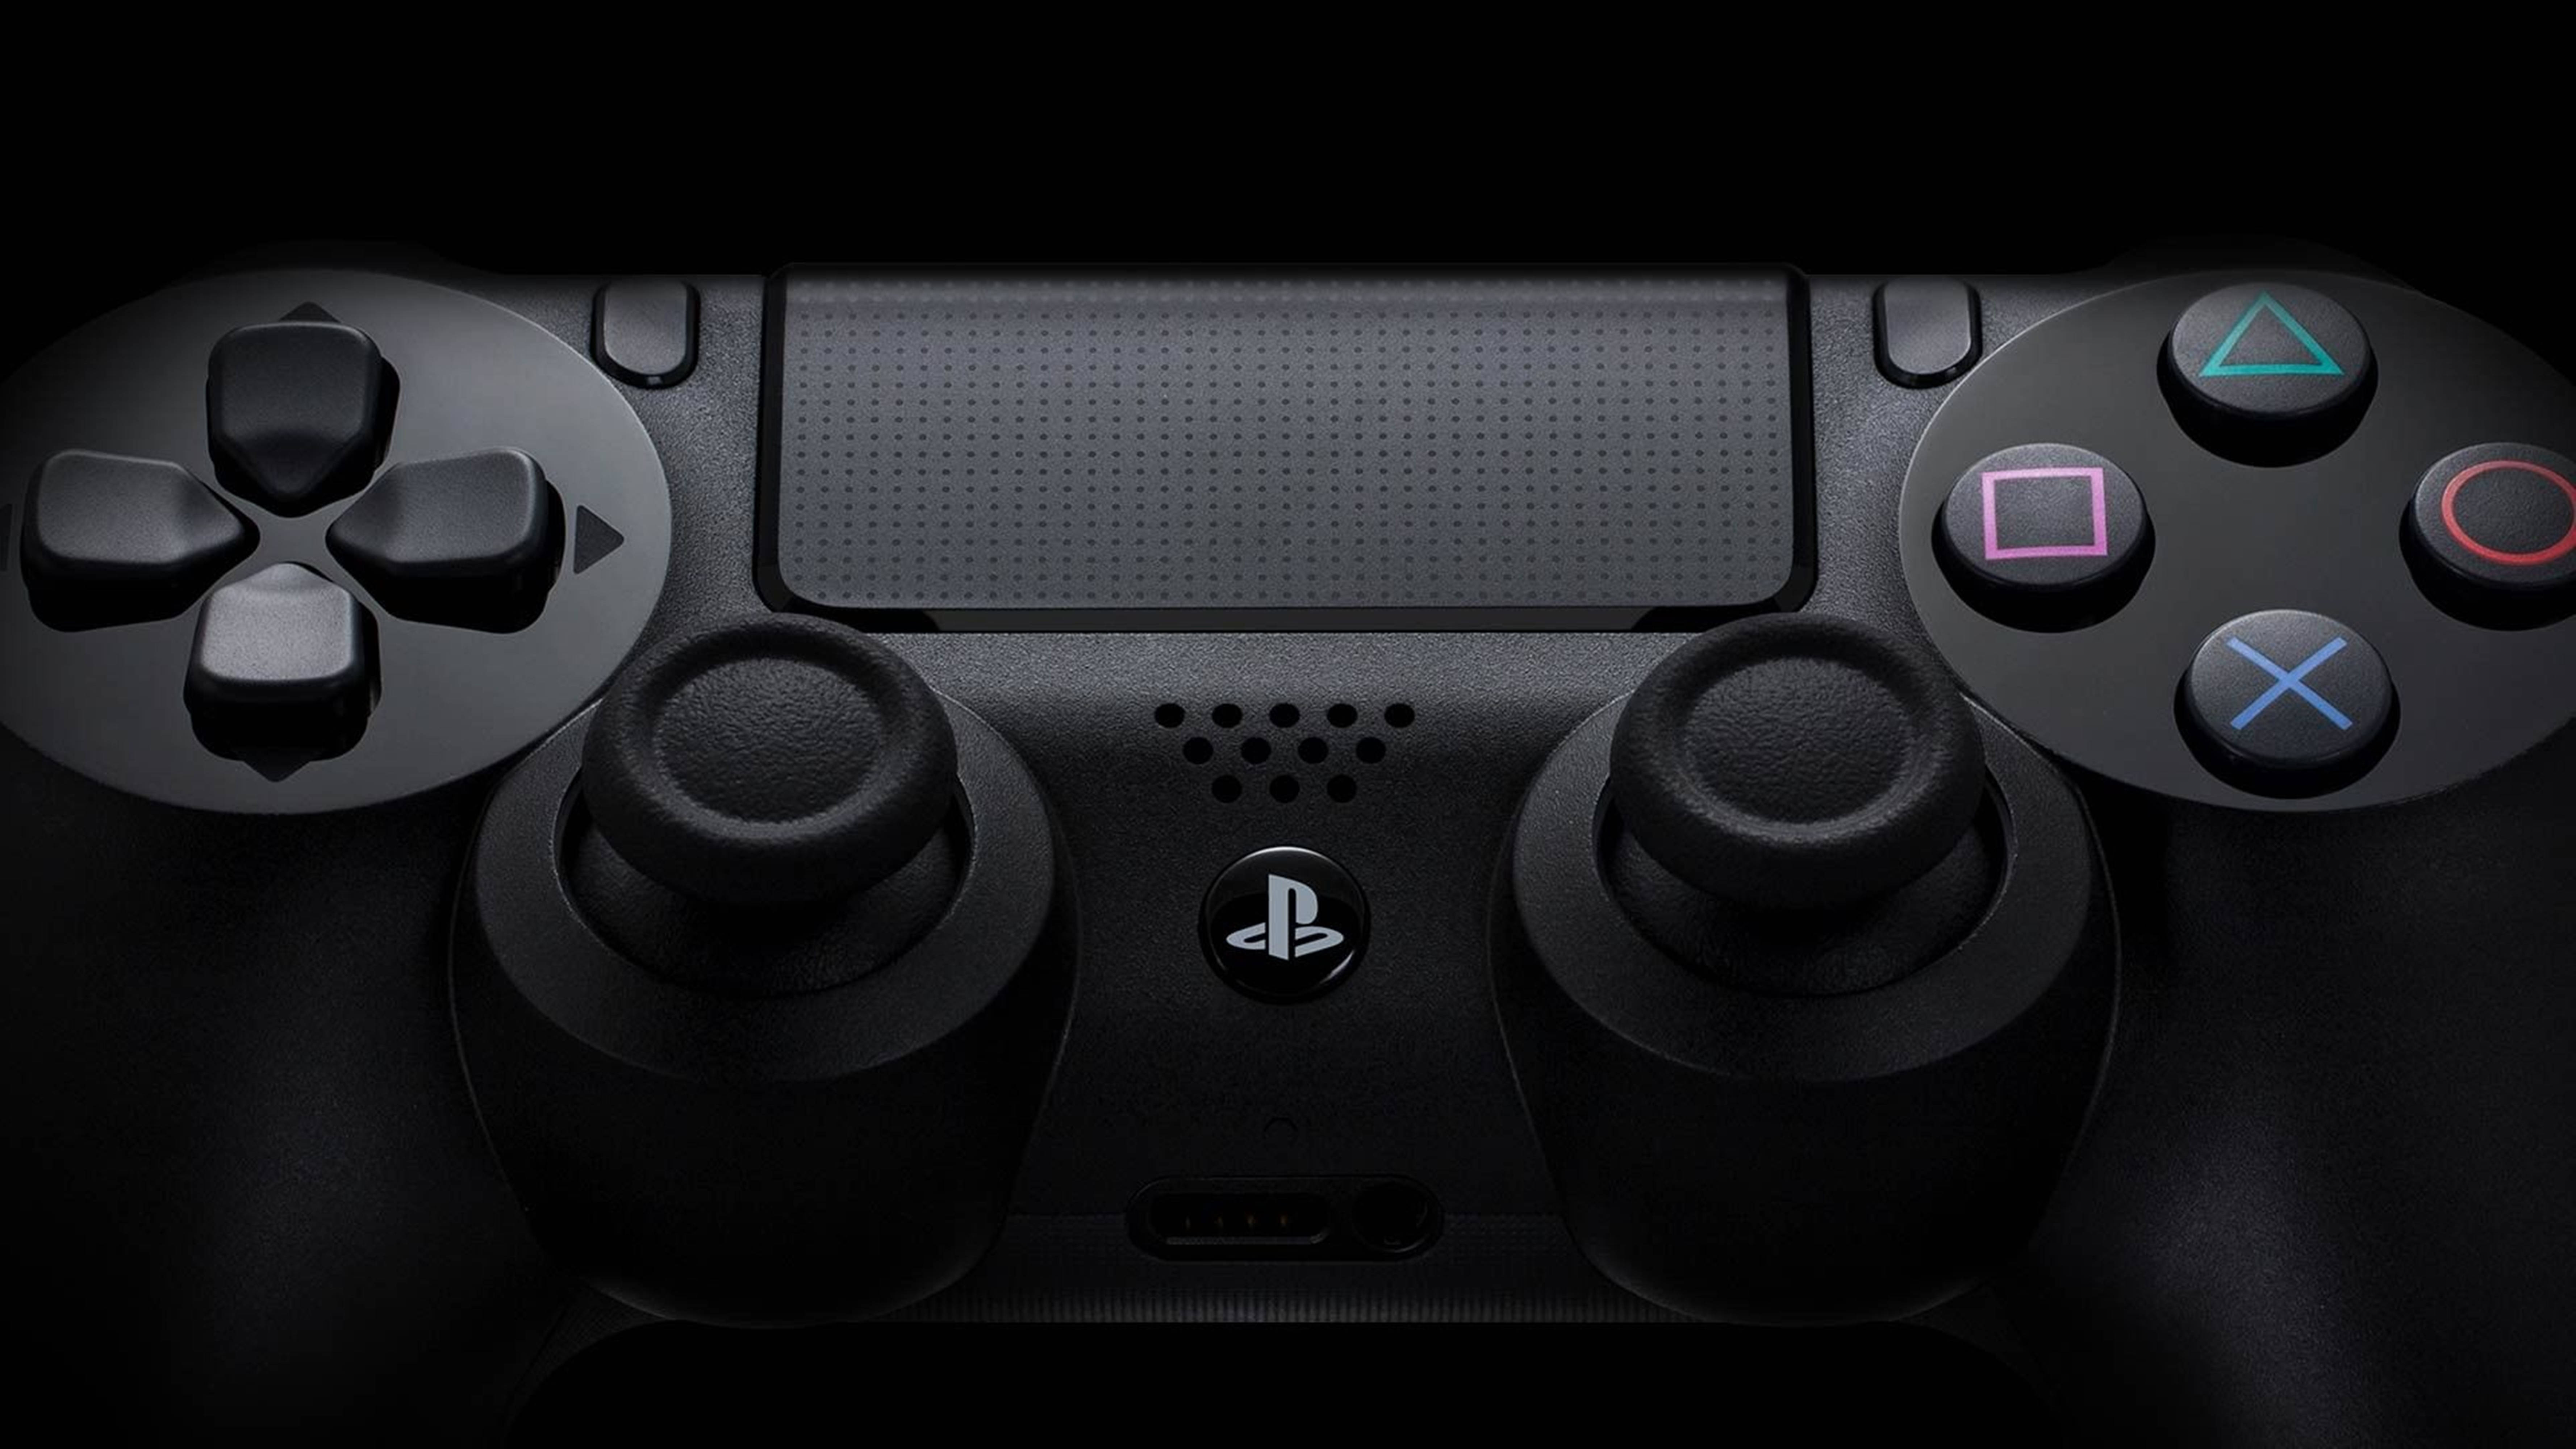 Playstation rus. Ps4 Gamepad. Sony PLAYSTATION Dualshock 4 Wireless Controller. Ps5 Dualshock 5.